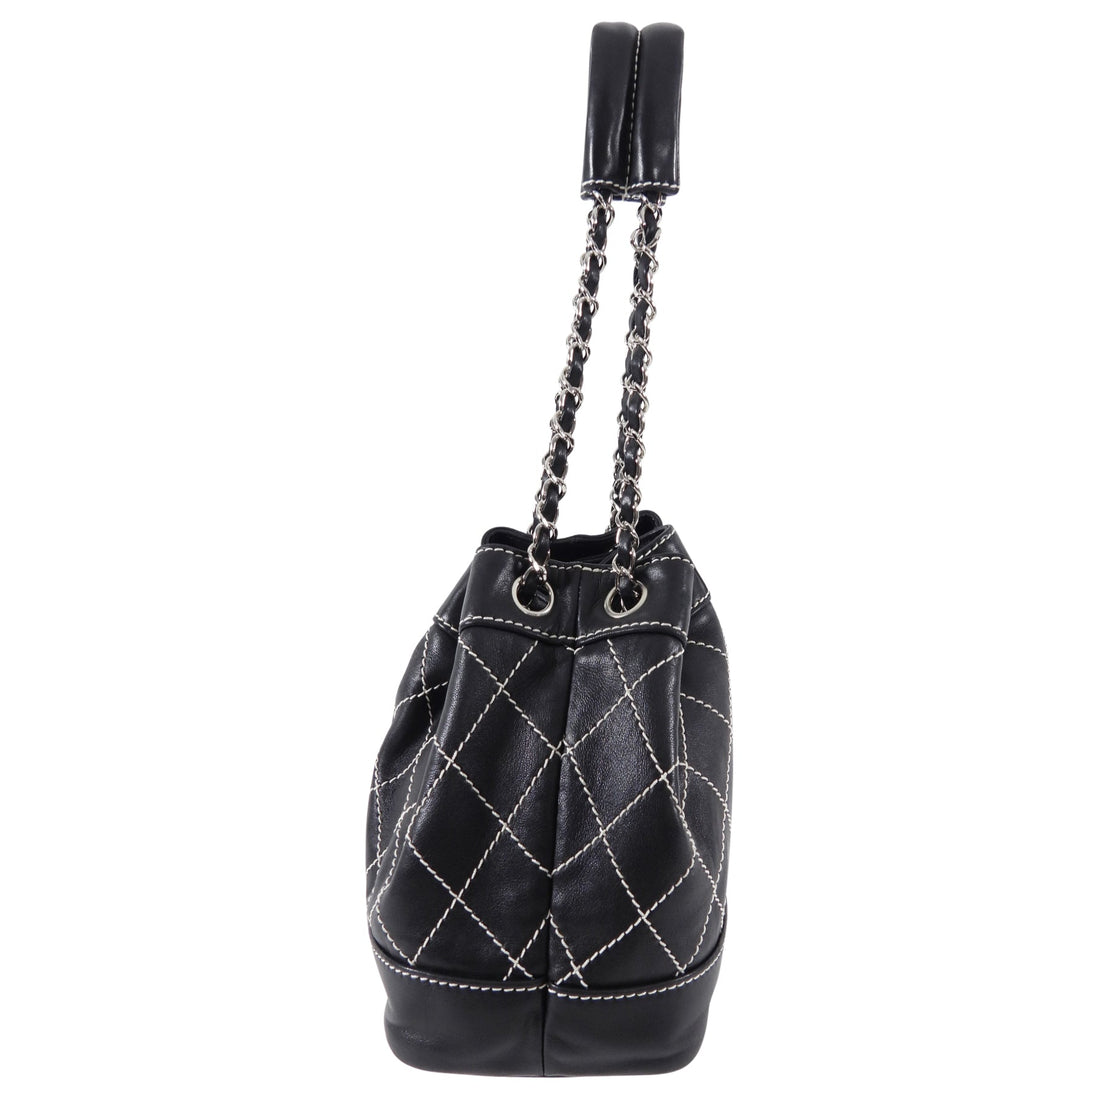 Chanel Drawstring Bucket Bag in Black Classic Quilted Lambskin - SOLD